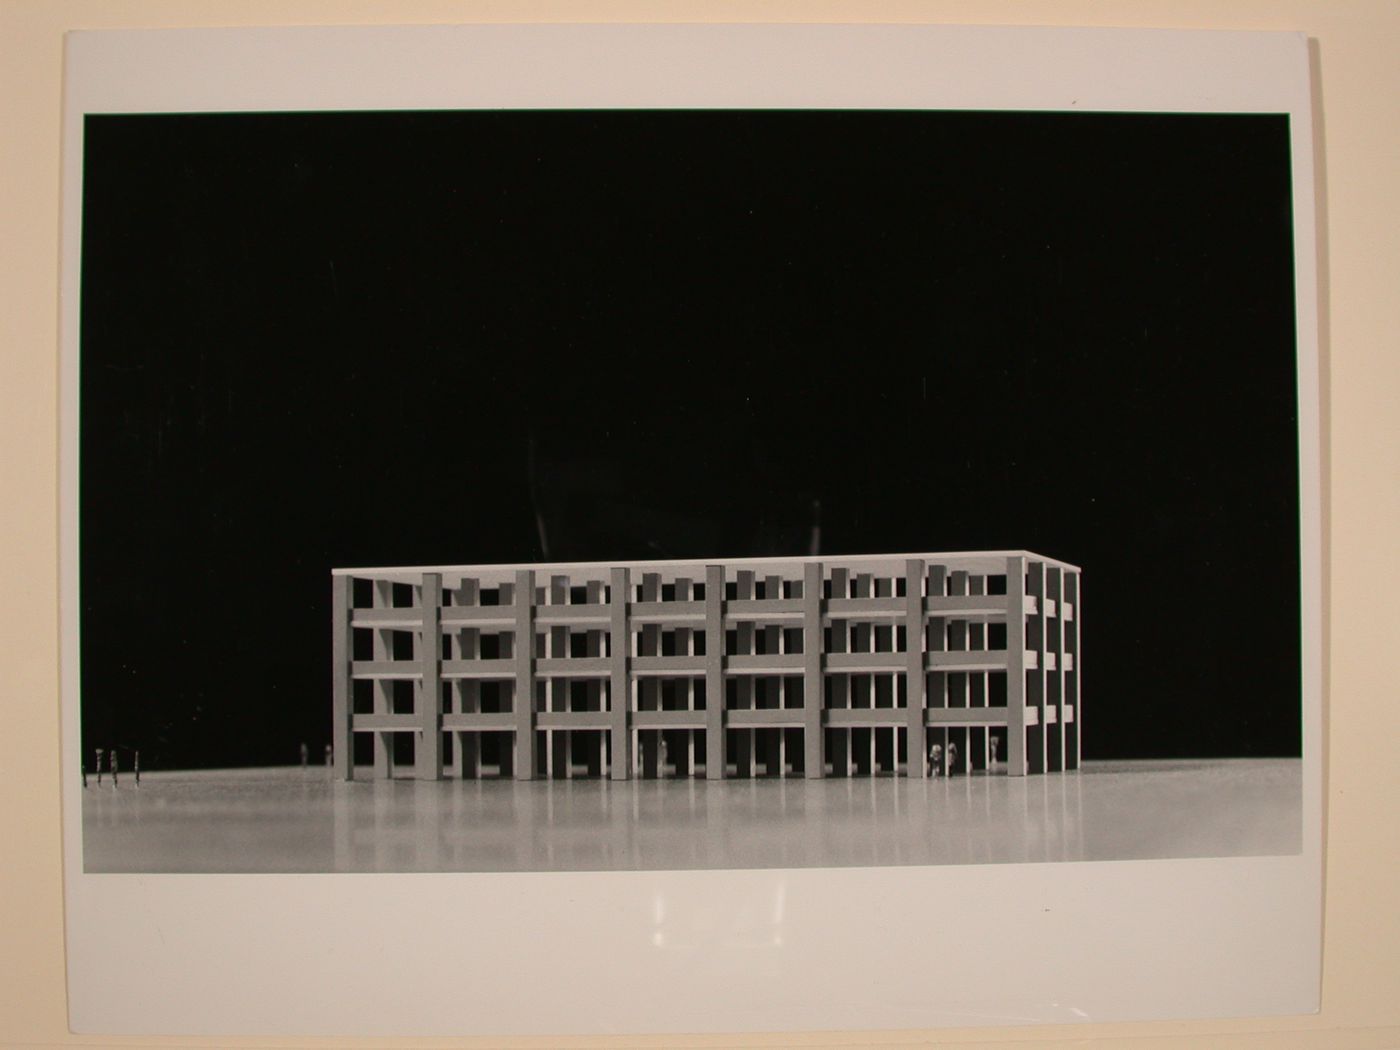 Photograph of a student [?] model for a building with masonry pier structural framework, Sequence of Tall Buildings